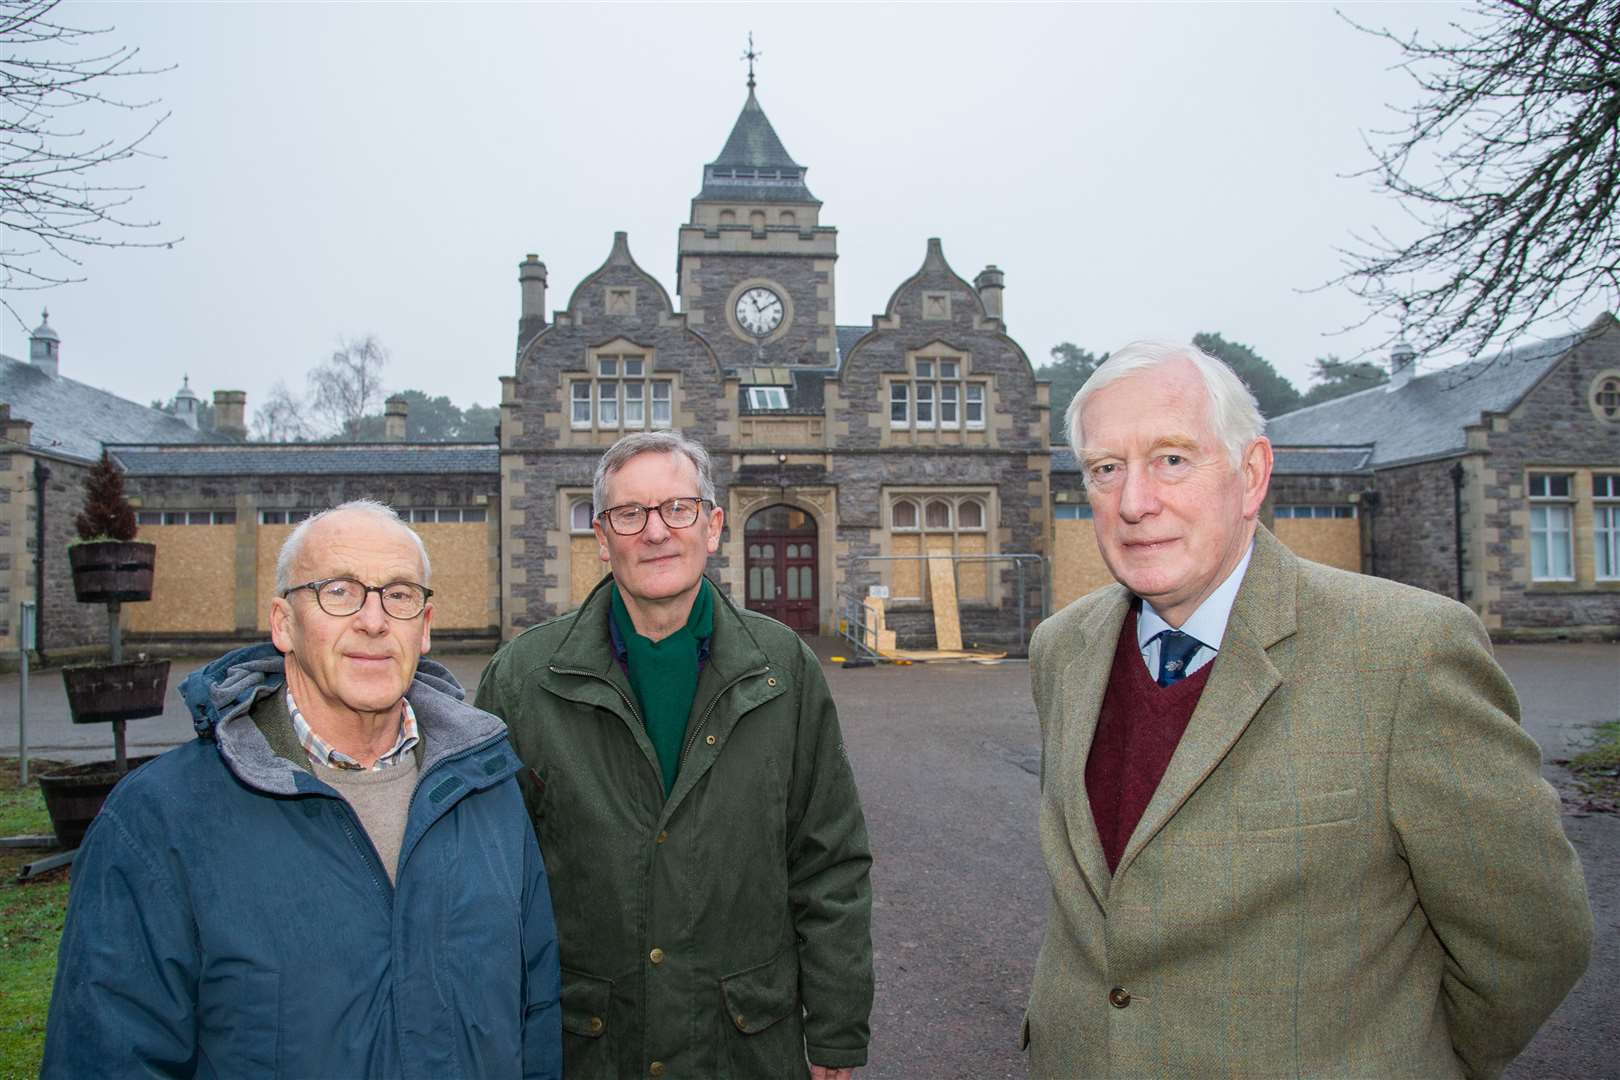 Members of the Leanchoil Steering Group - left to right - Major General Seymour Monro, Tom Duff and Andrew Anderson outside the disused Forres hospital after it was annouced that it will be taken over by Erskine, a veterans care charity. ..Picture: Daniel Forsyth..